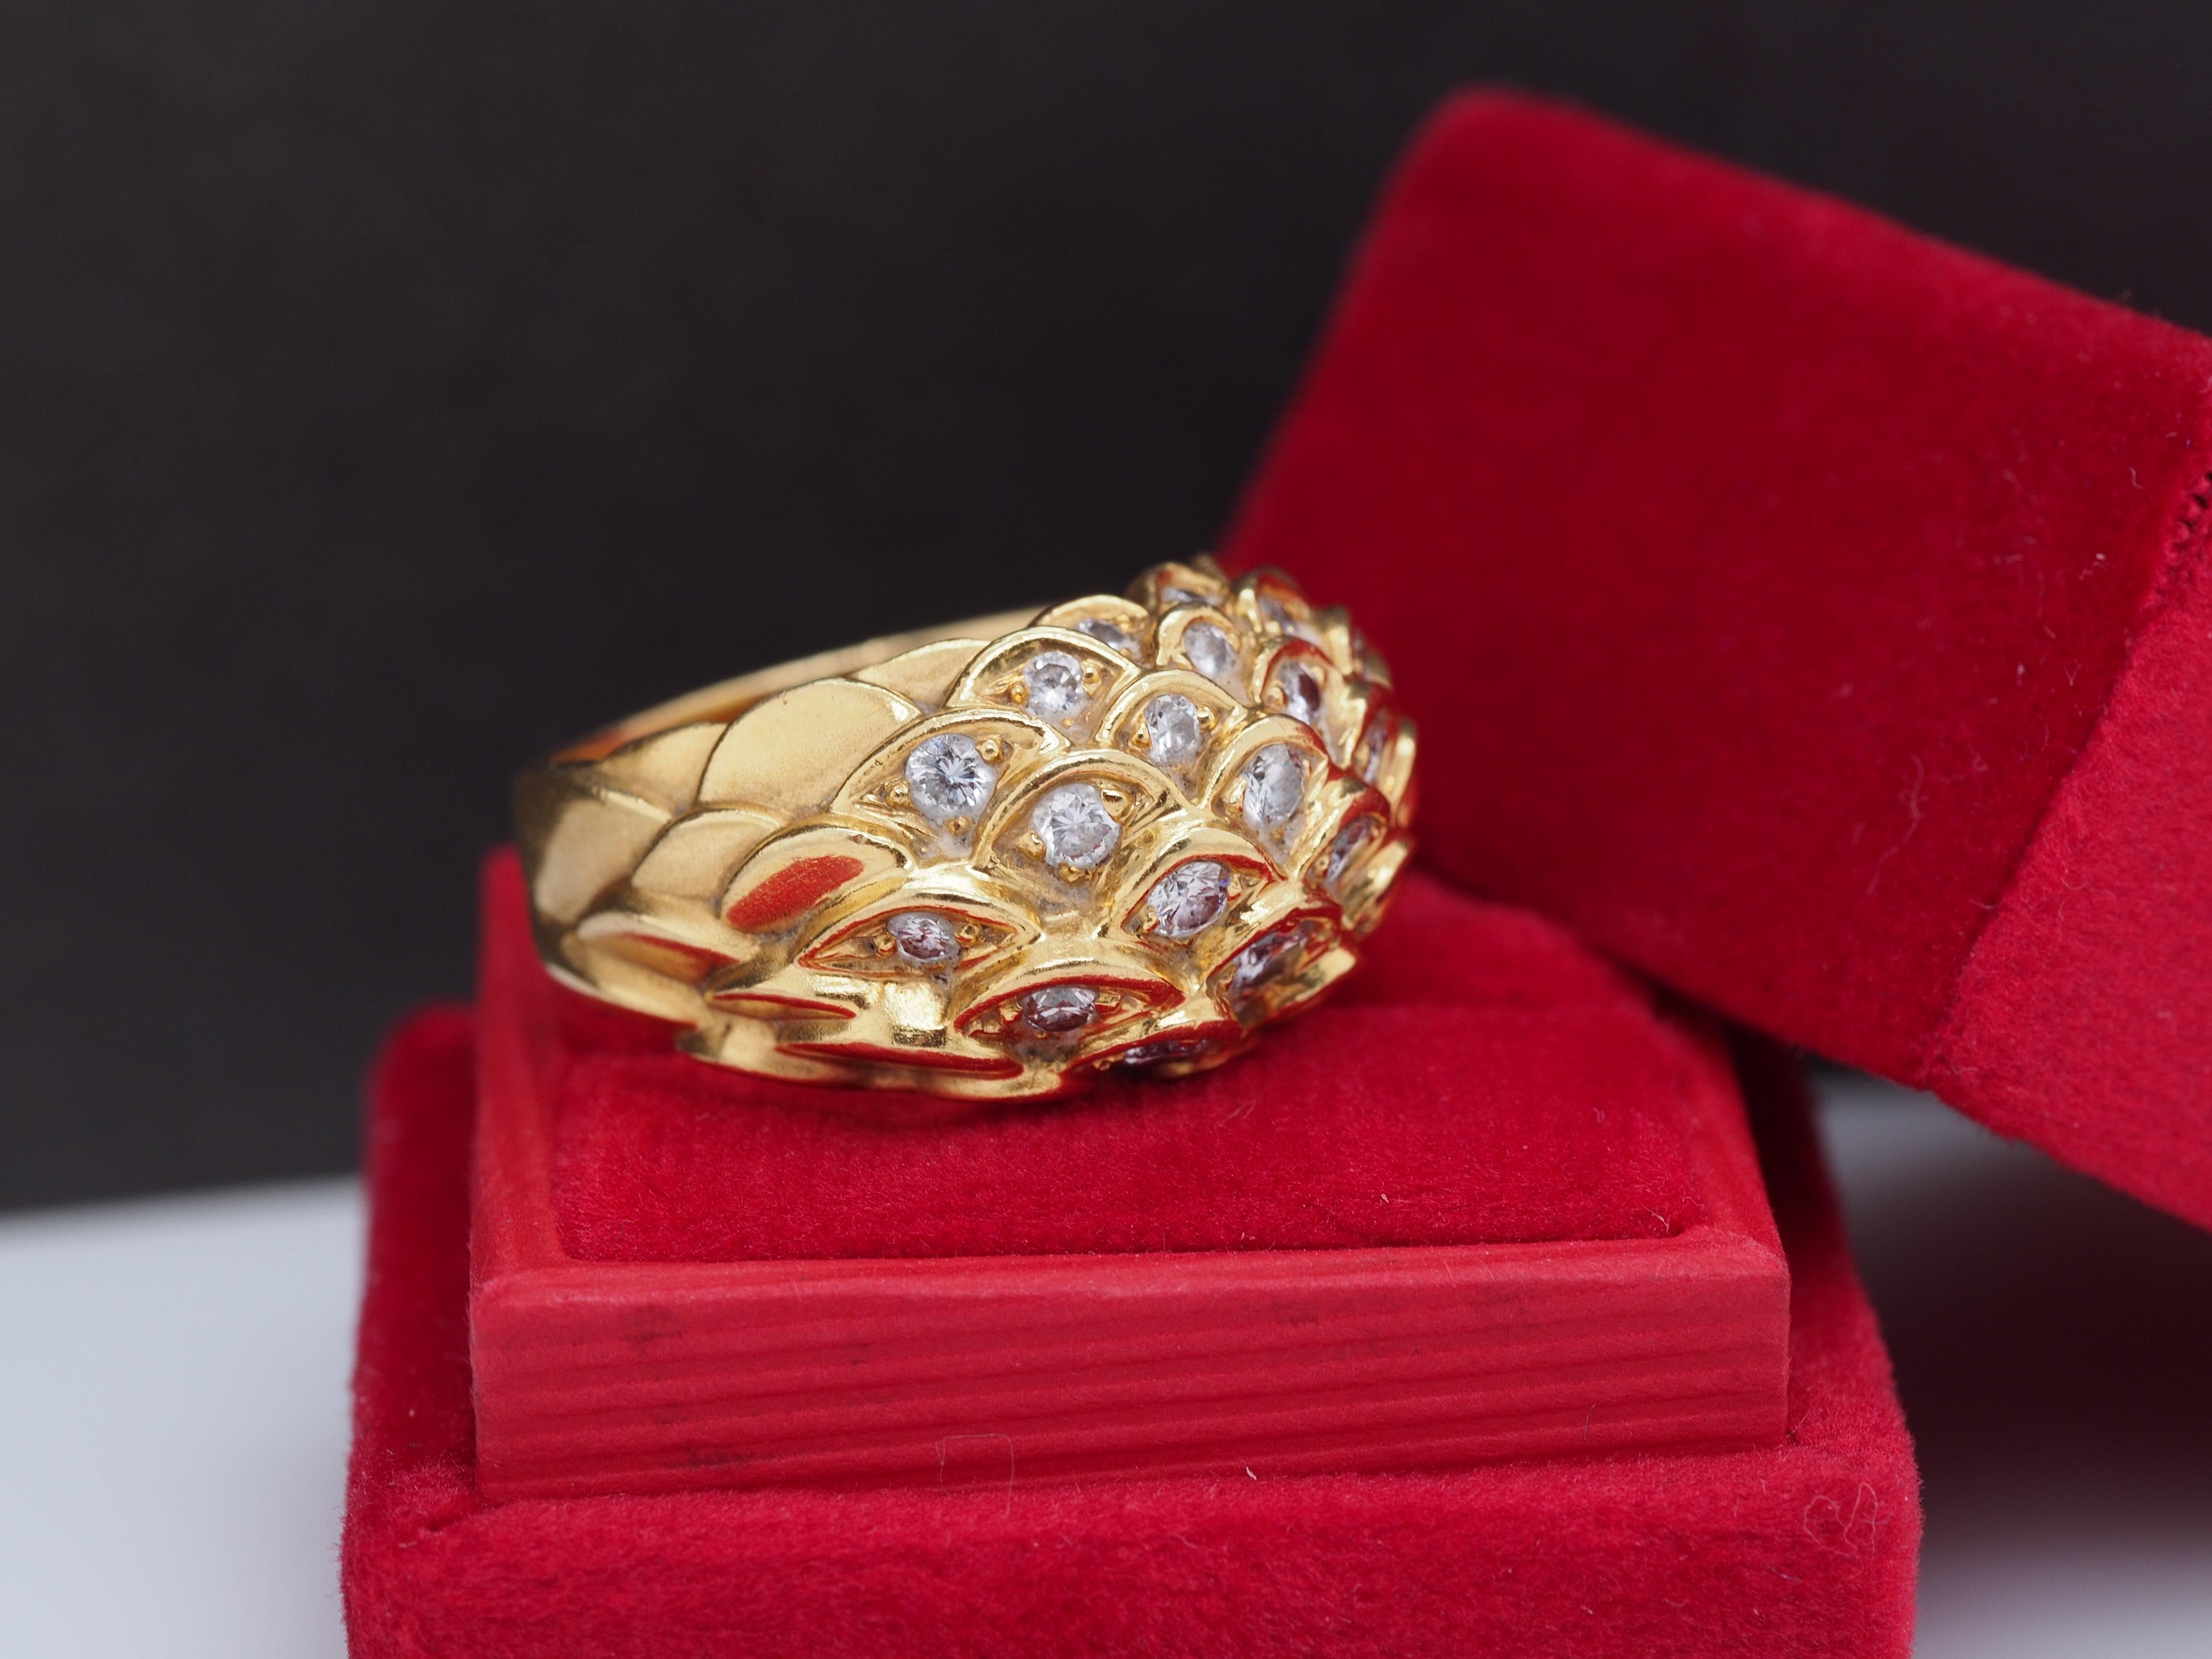 Year: 1990s
Item Details:
Ring Size: 5
Metal Type: 18K Yellow Gold [Hallmarked, and Tested]
Weight: 14 grams
Diamond Details: .50ct total weight, F Color, VS Clarity, Round Brilliant Cut, Natural Diamonds
Band Width: 5.25 mm
Condition: Excellent